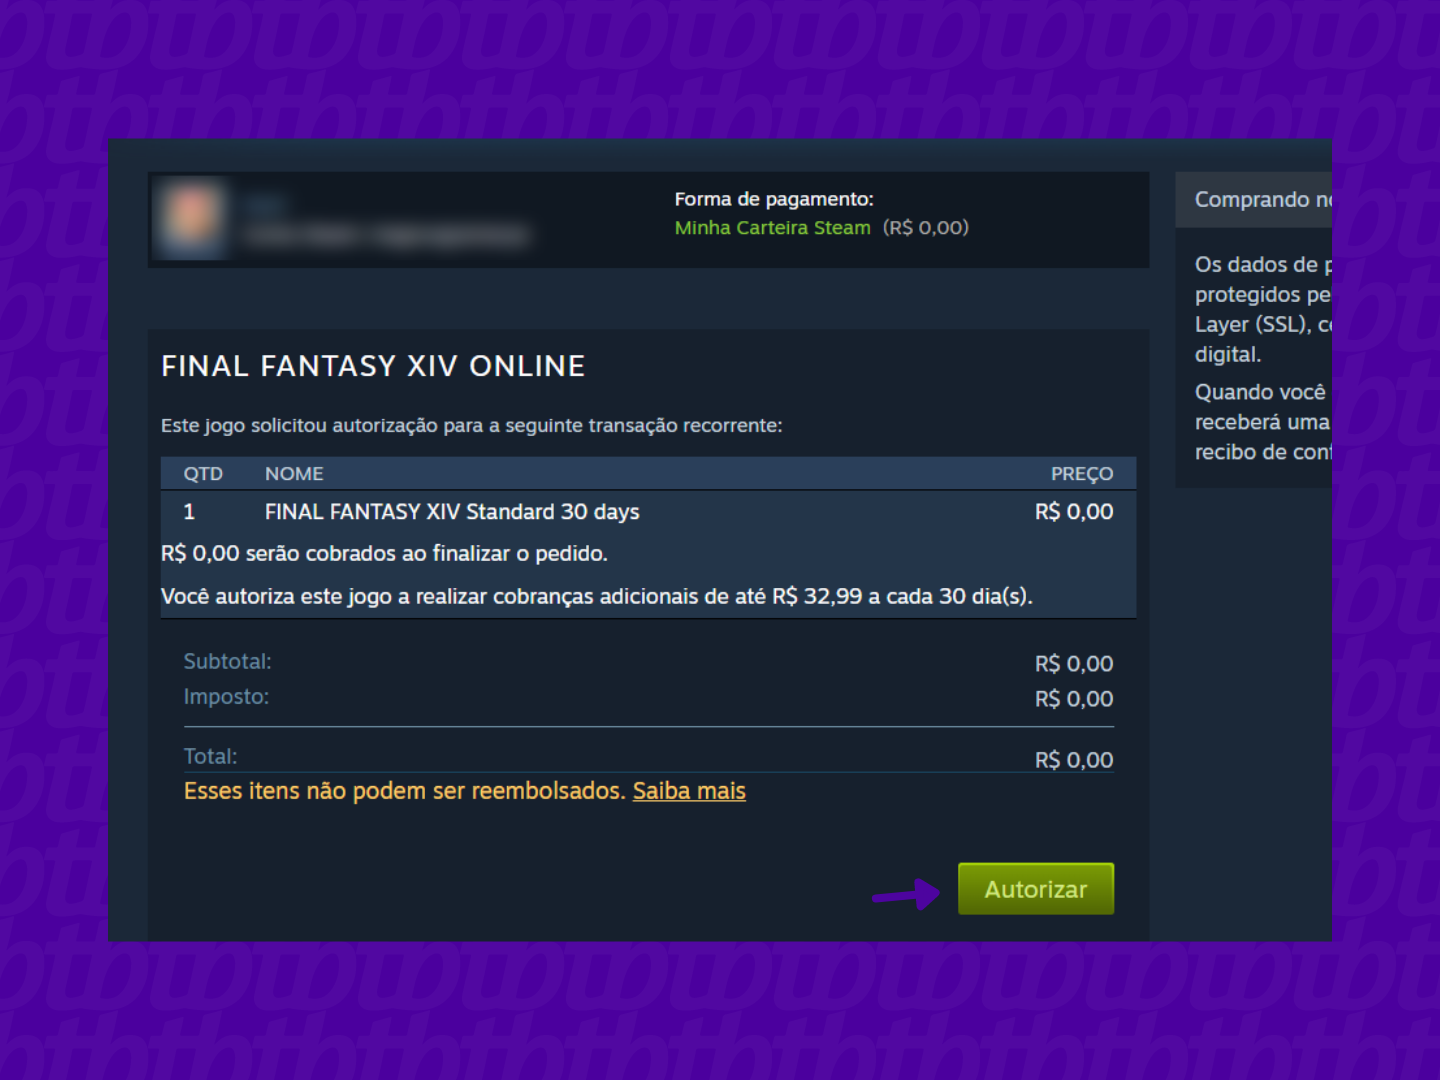 Completing the Final Fantasy 14 monthly purchase via Steam